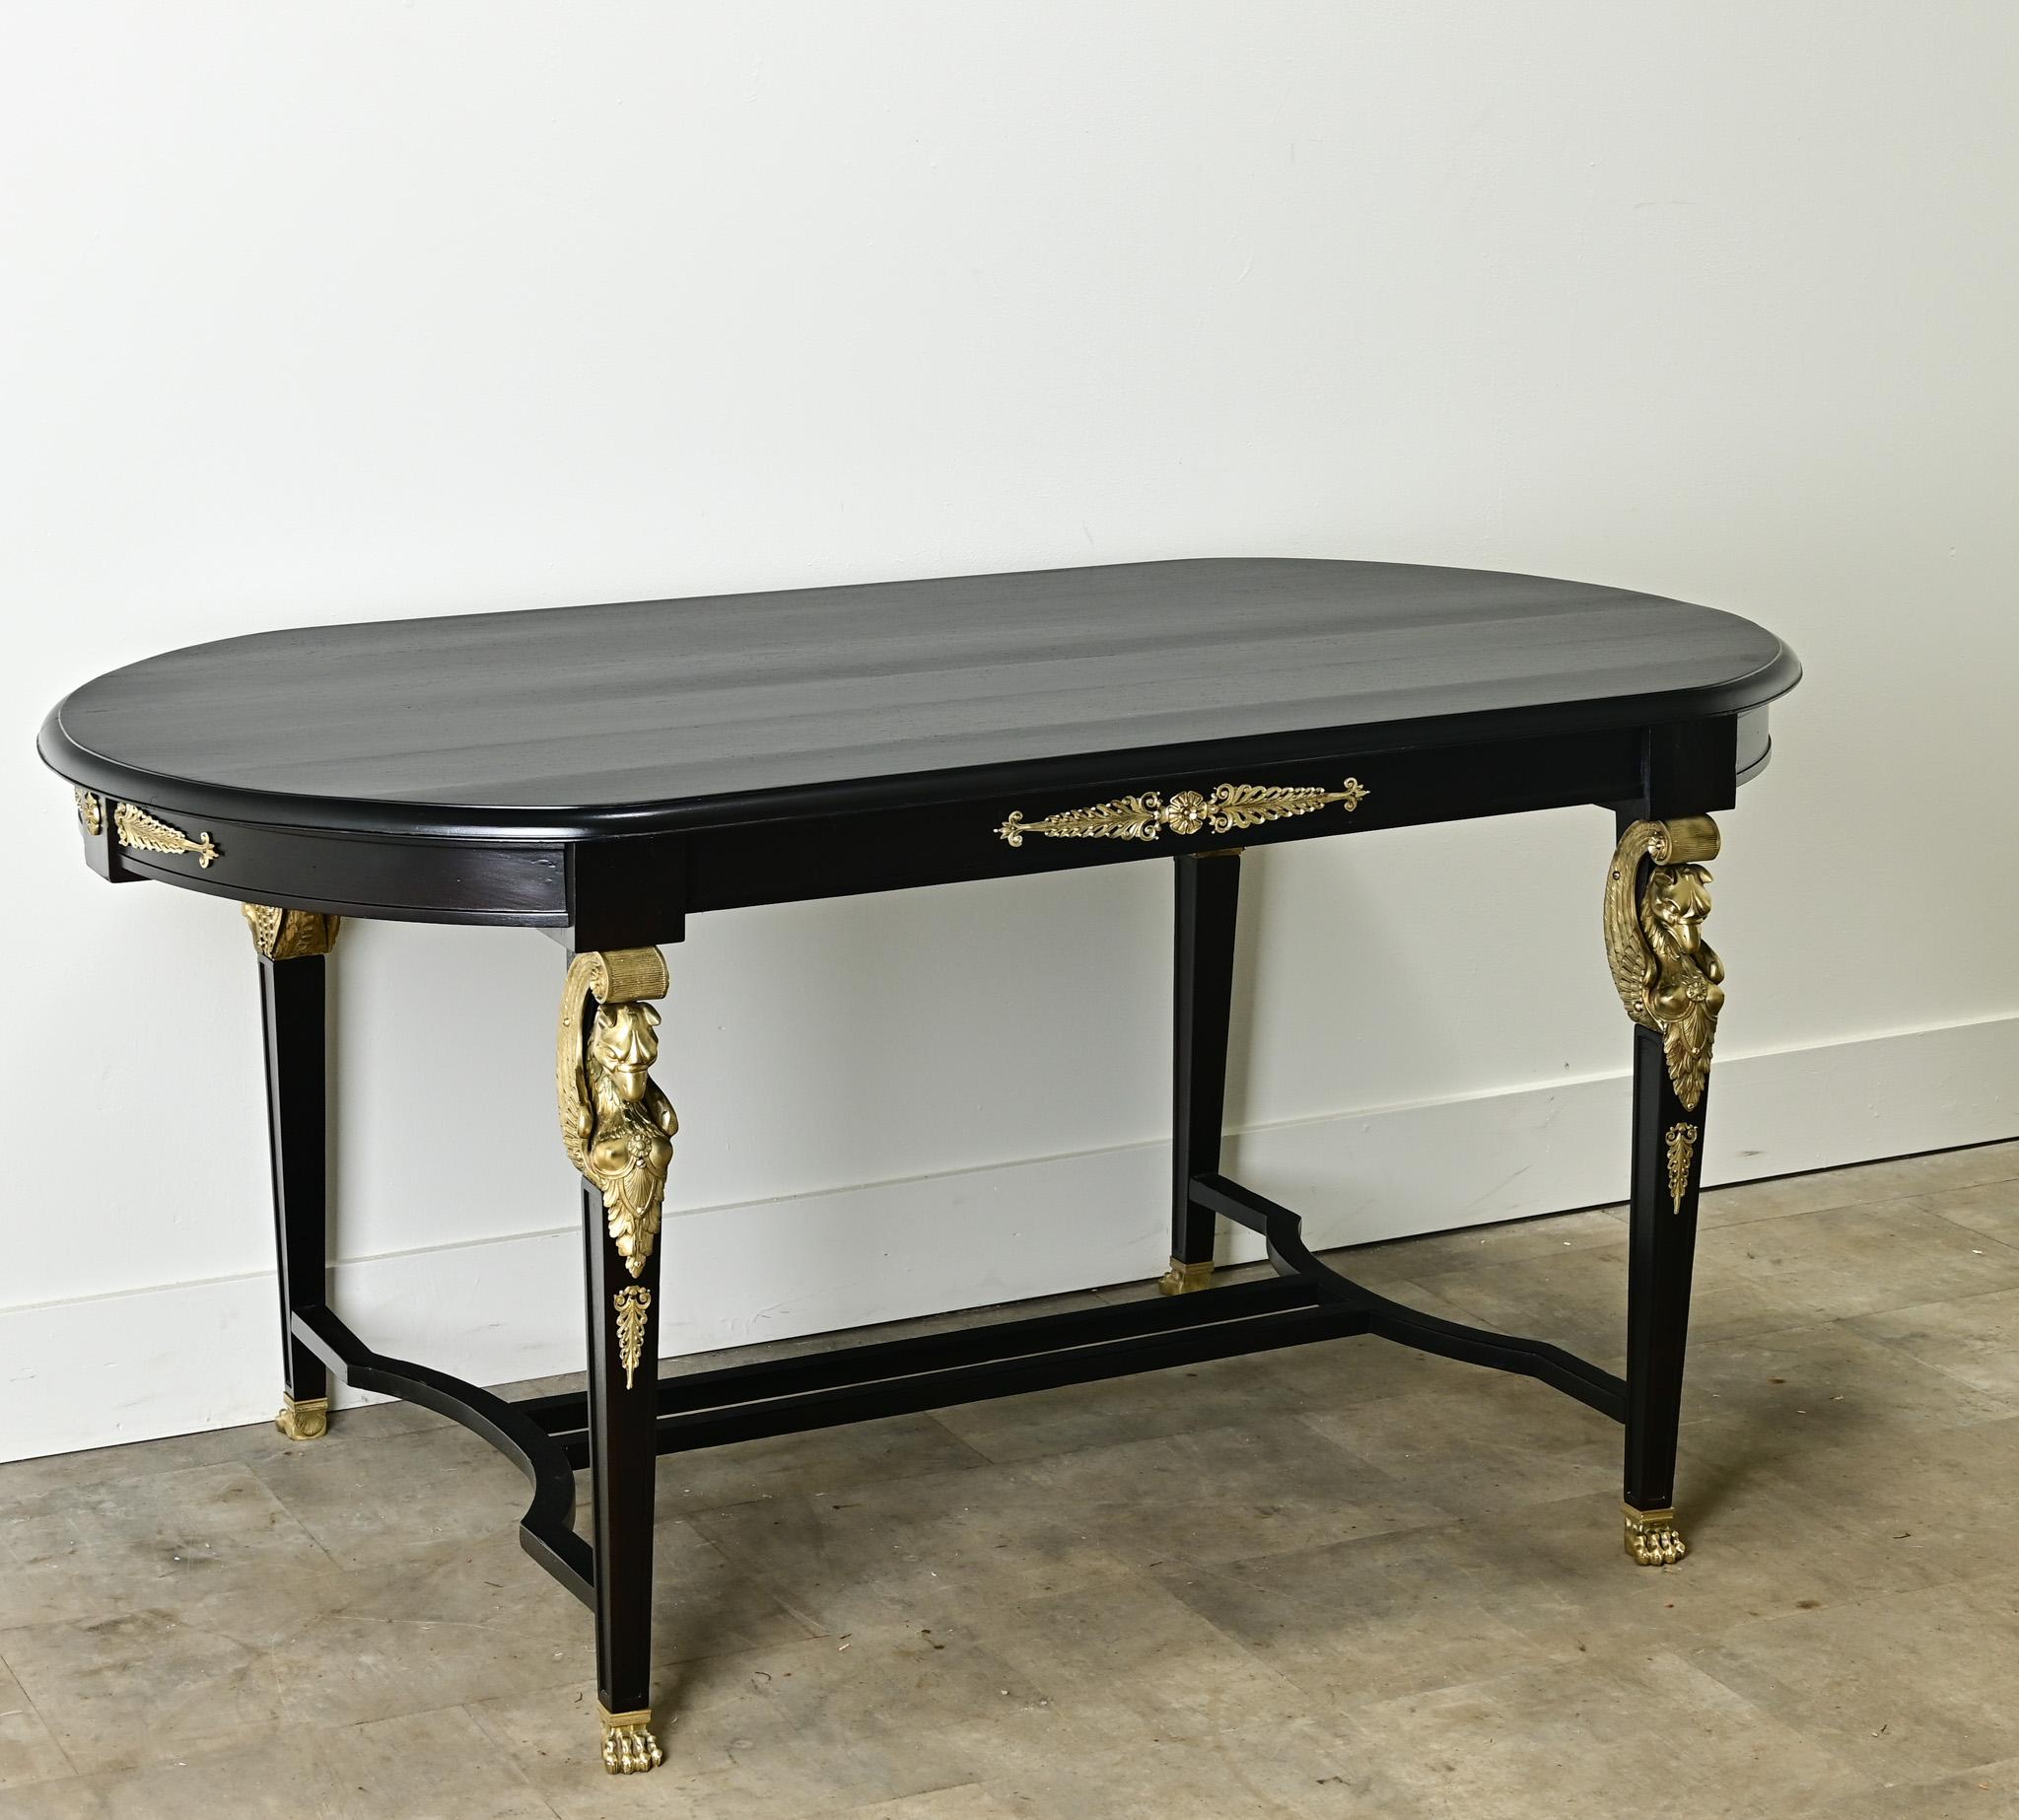 A French ebonized dining table from the Empire period. This mahogany table with curved ends has recently been refinished and ebonized. You’ll find impressive gilt bronze ormolu throughout the table base that has recently been polished. This table is